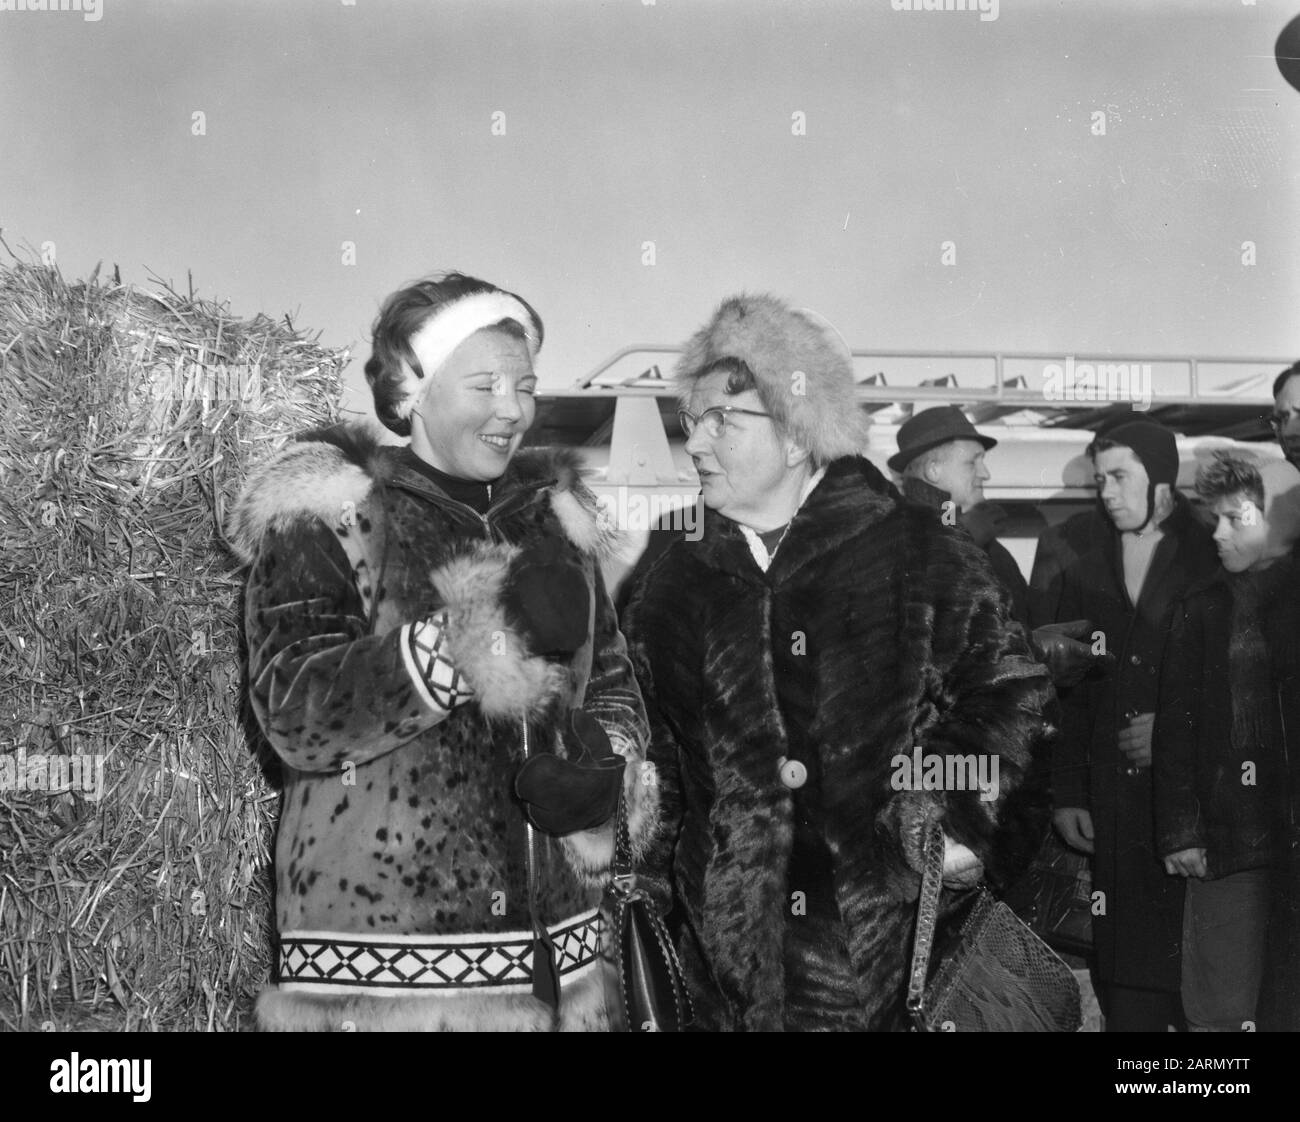 Elfstedentocht 1963. queen Juliana and Princess Beatrix at the finish in Leeuwarden Date: 18 January 1963 Location: Friesland, Leeuwarden Keywords: royal house, skating, sport, spectators Personal name: Beatrix, princess, Juliana (queen Netherlands), Juliana, Queen Institution name: Elfstedentocht Stock Photo